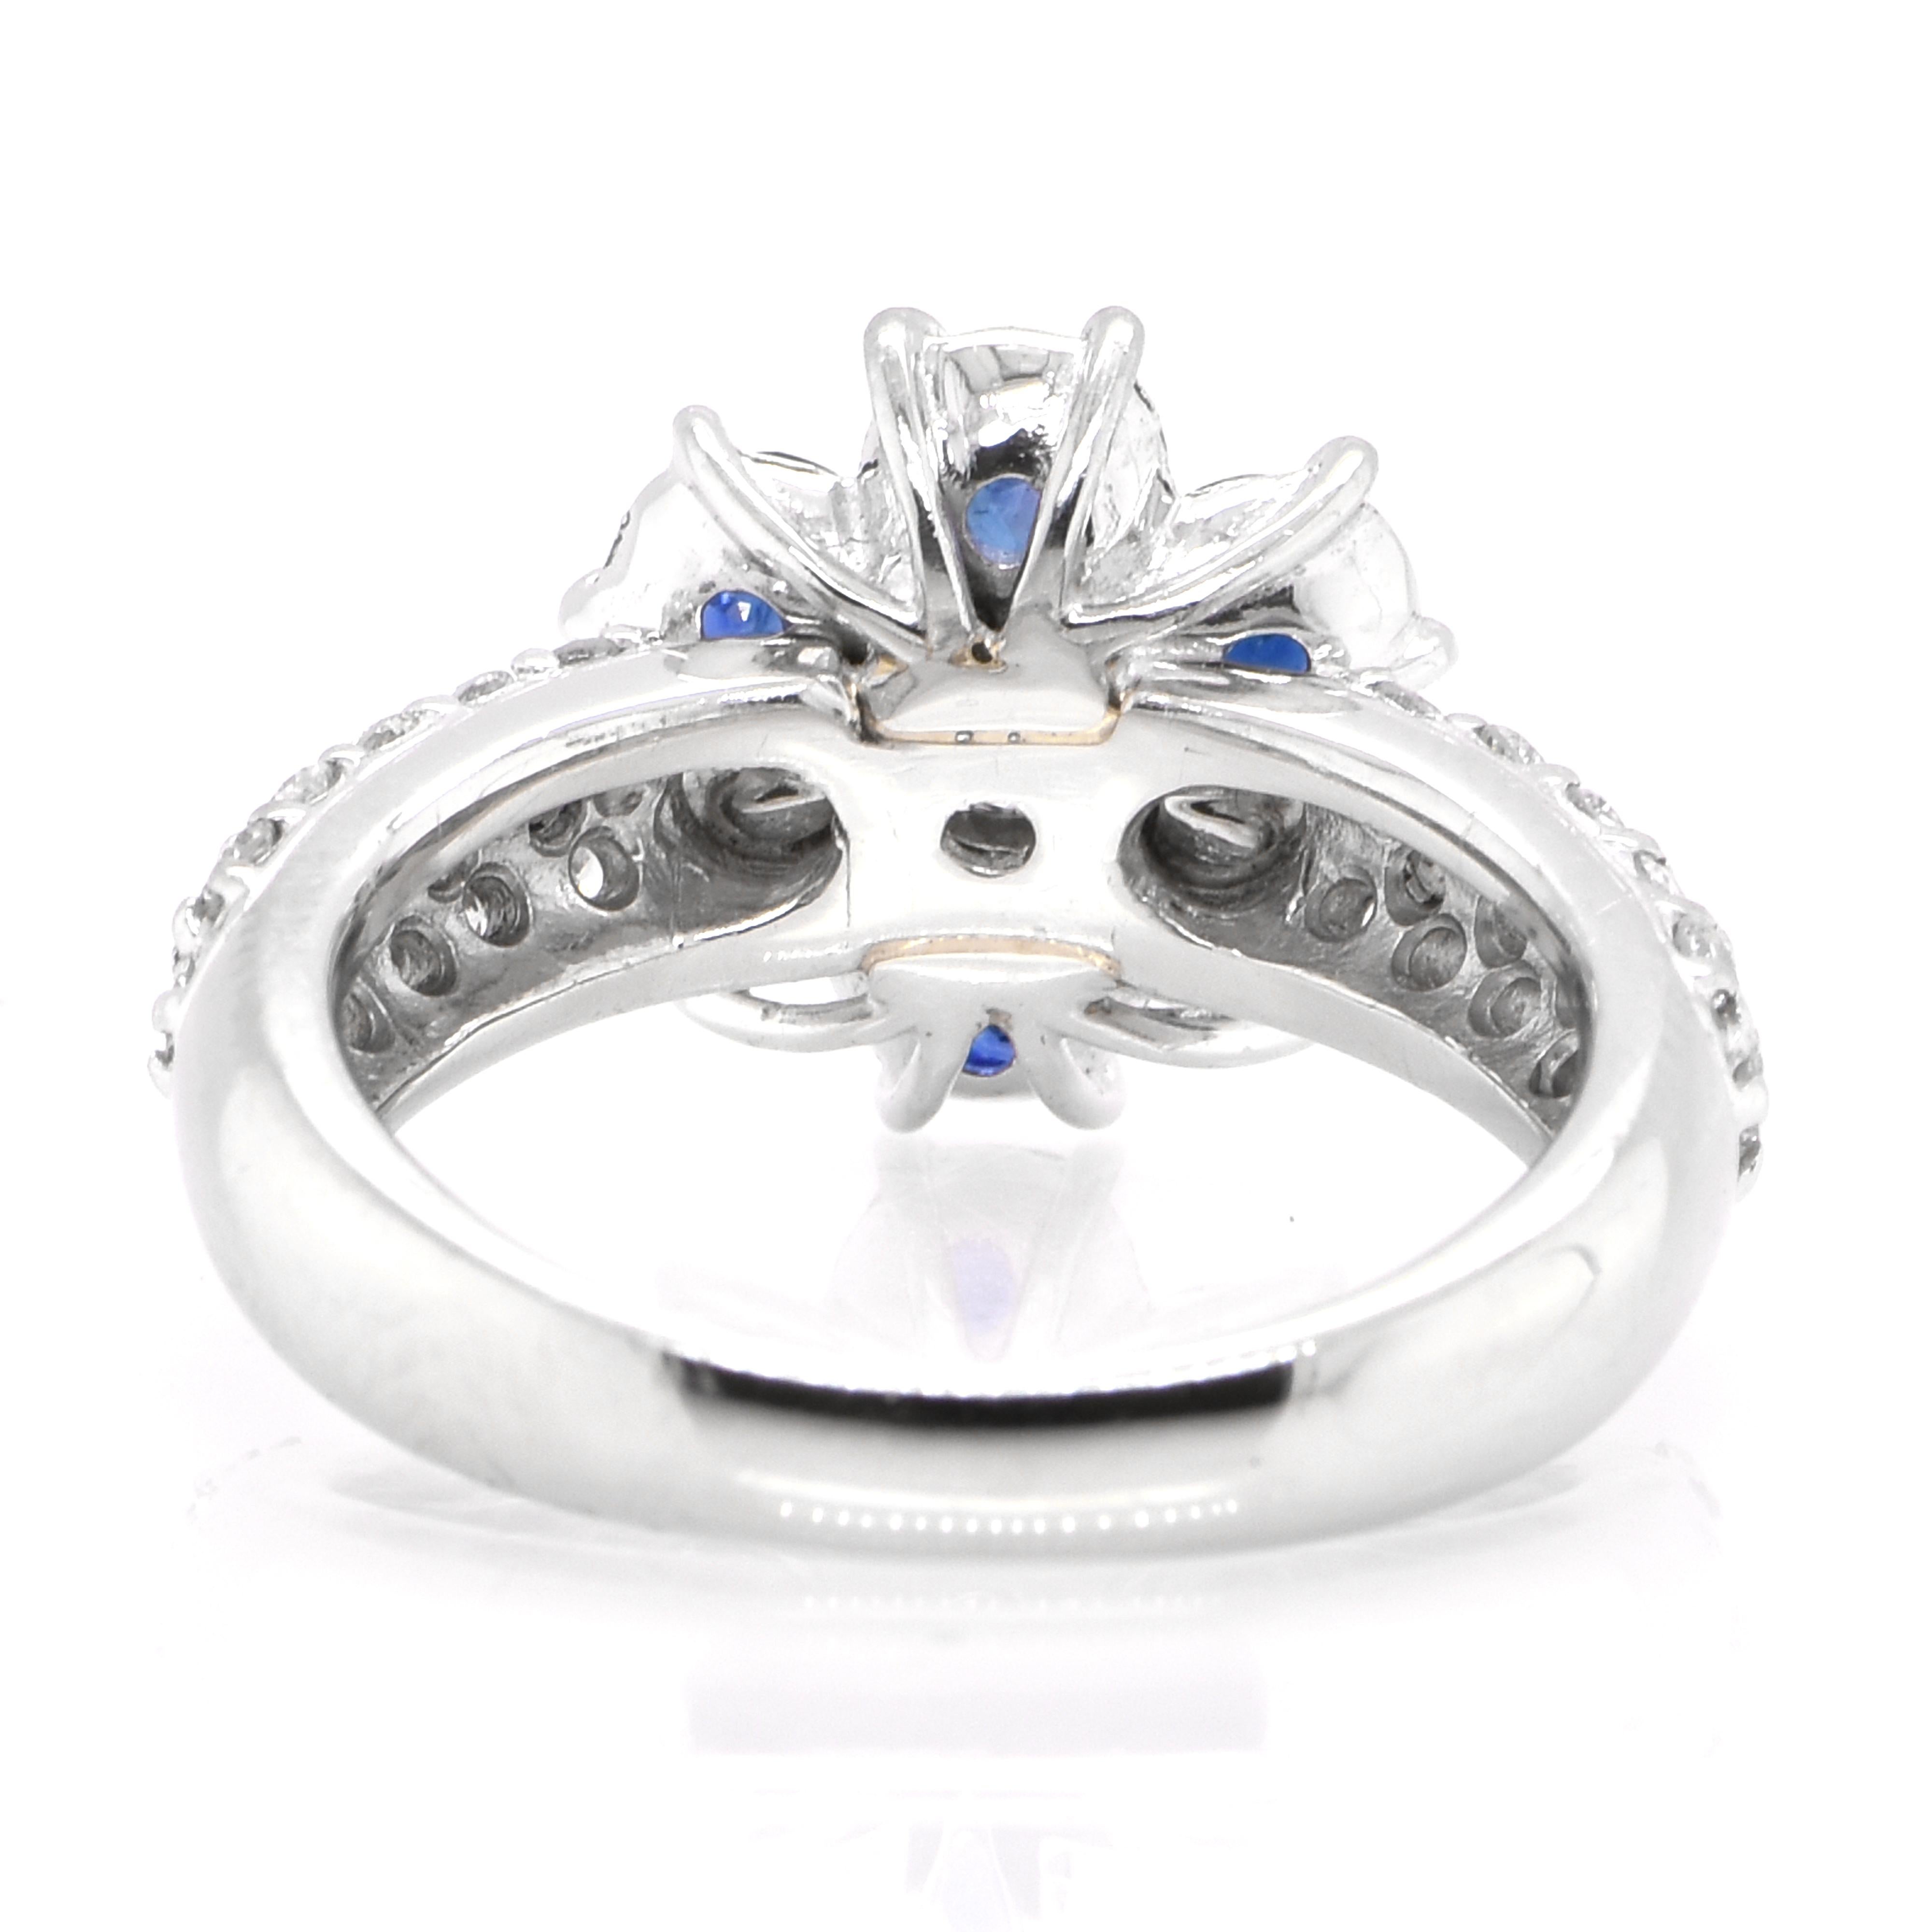 Women's 1.29 Carat Natural Sapphire and Diamond Cluster Ring Set in Platinum For Sale